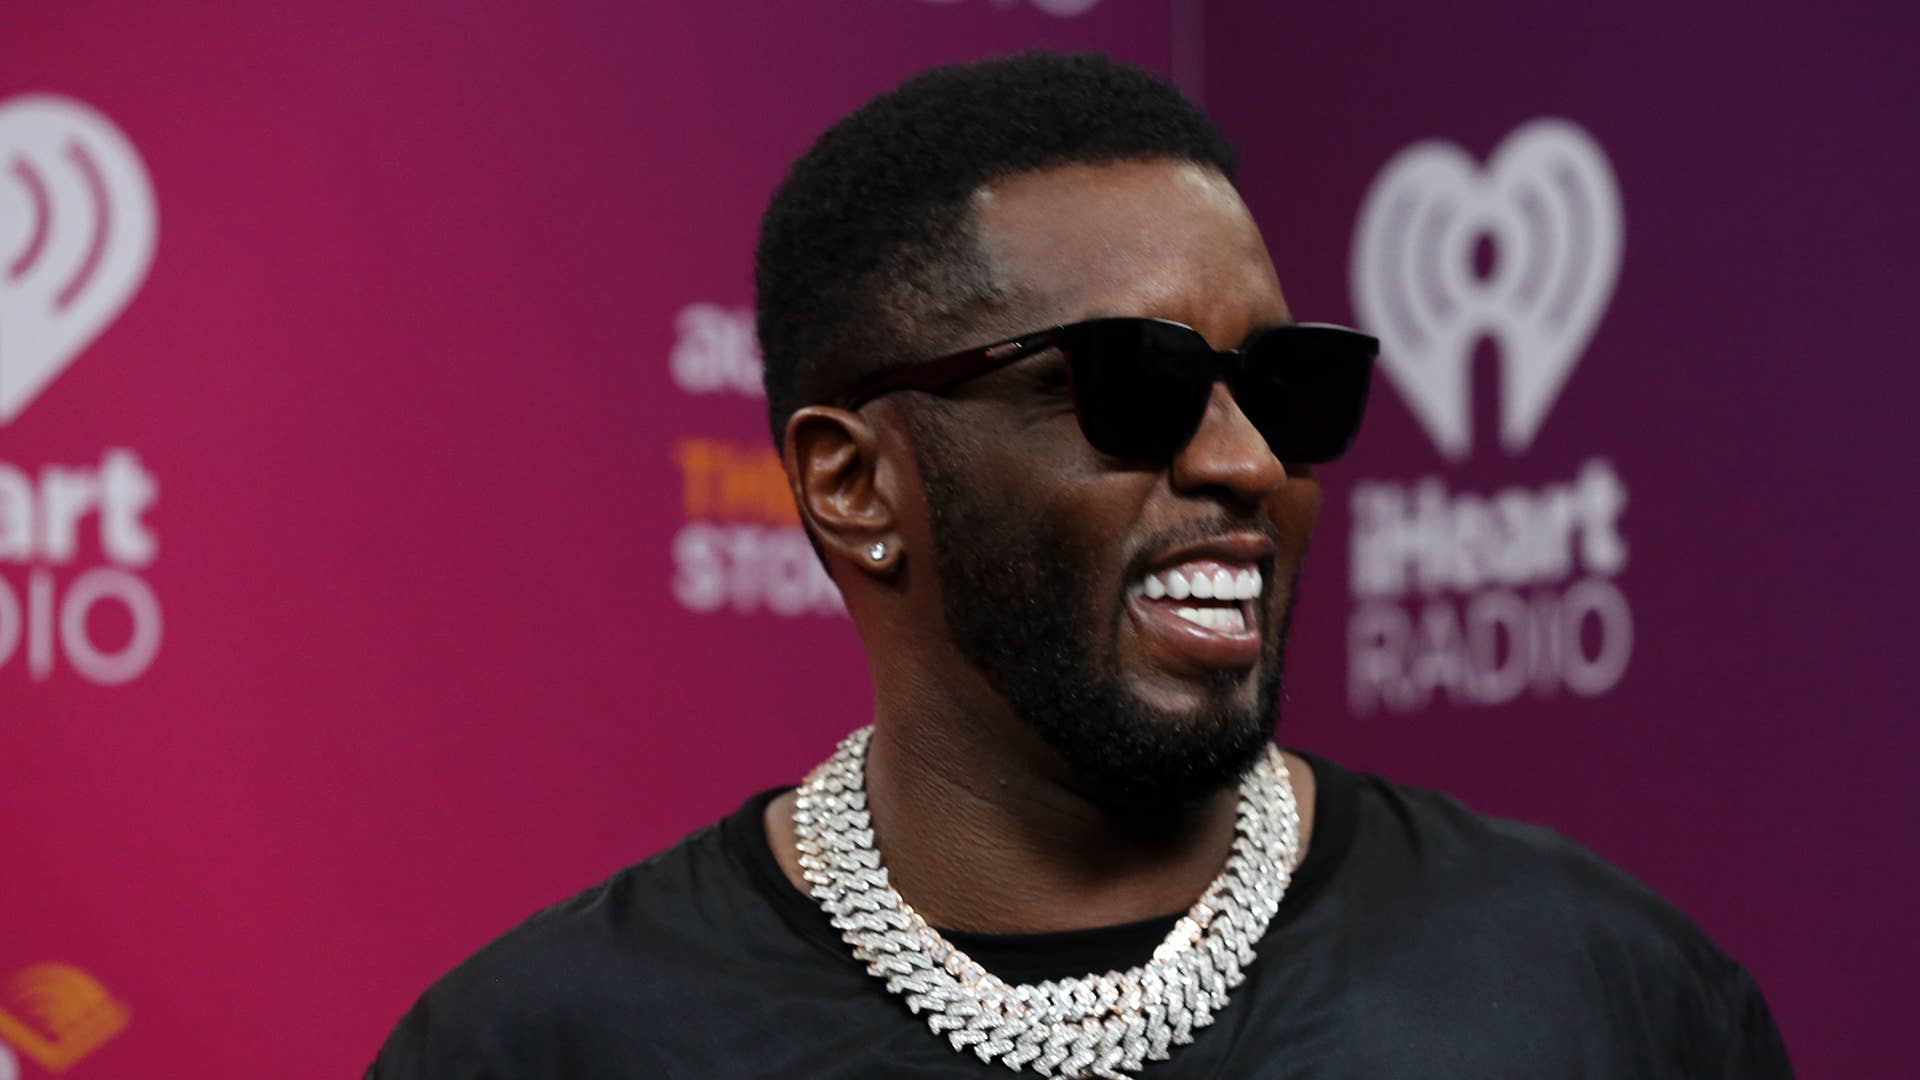 Sean “Diddy" Combs attends the 2022 iHeartRadio Music Festival